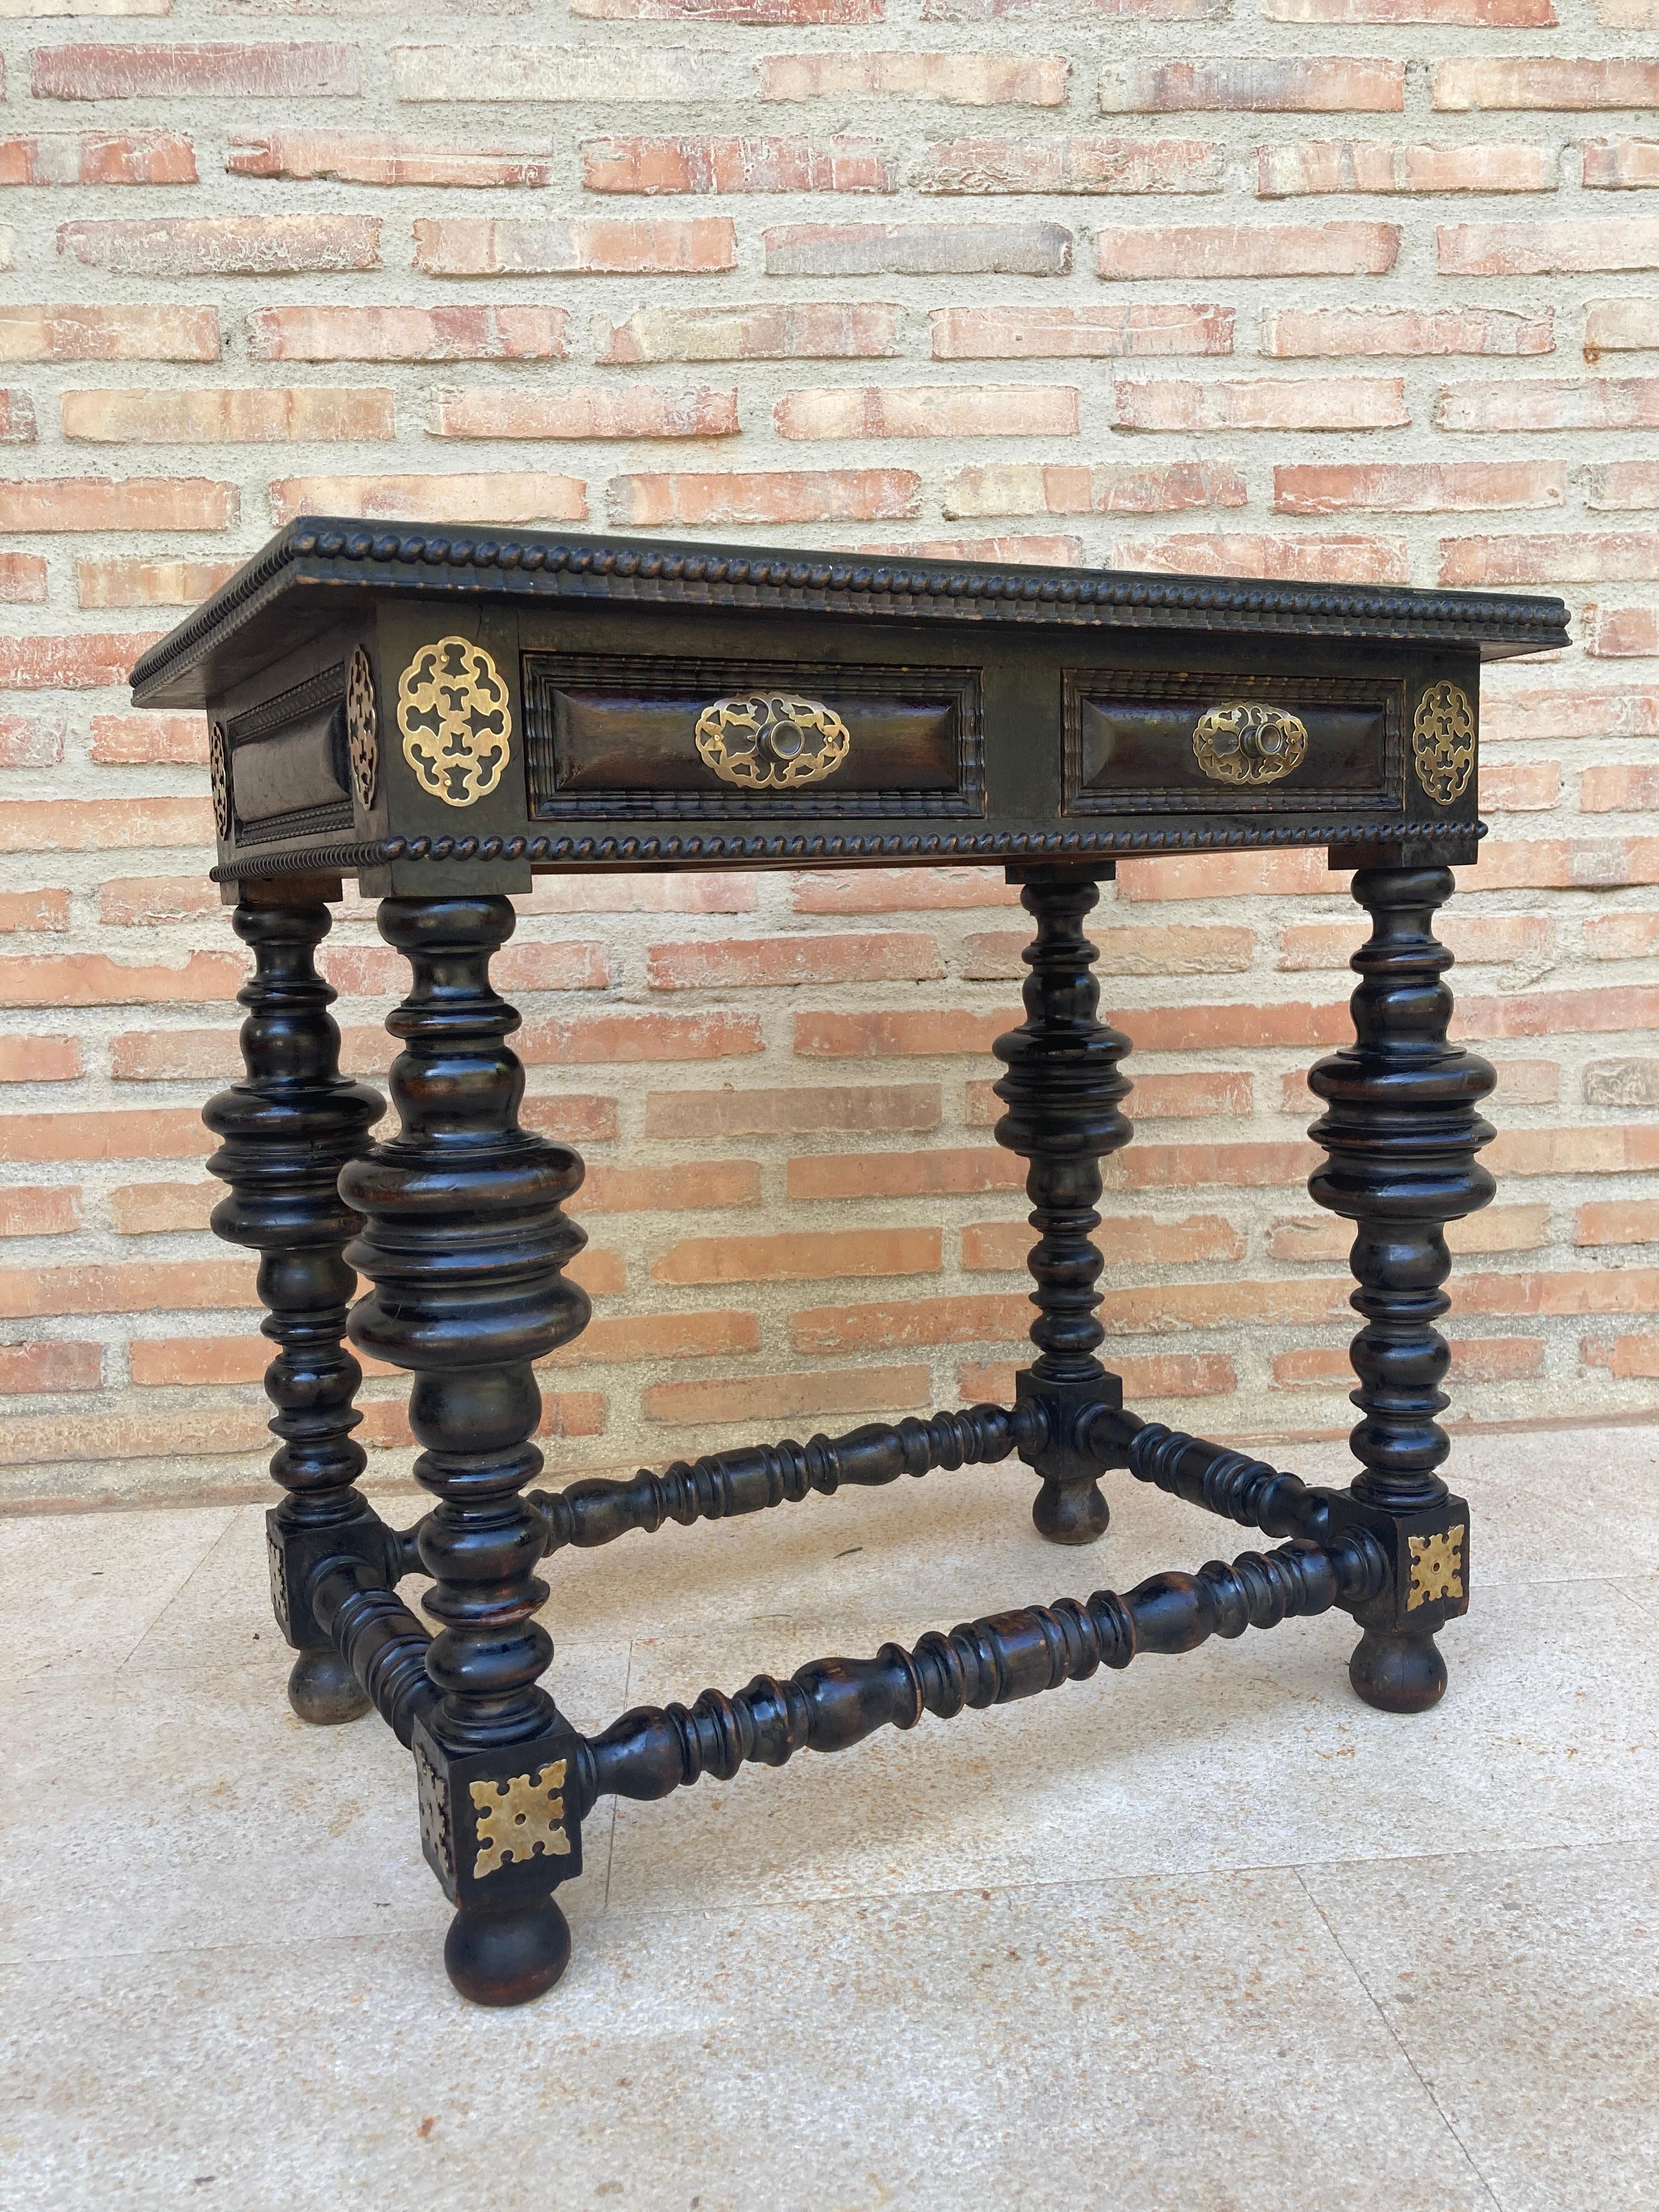 Walnut ebonized side table with single drawer, Spanish 1880s.
A Spanish walnut side table with single drawer, scalloped apron, turned legs and iron side stretcher from the late 19th century. This elegant Spanish table features a simple, rectangular